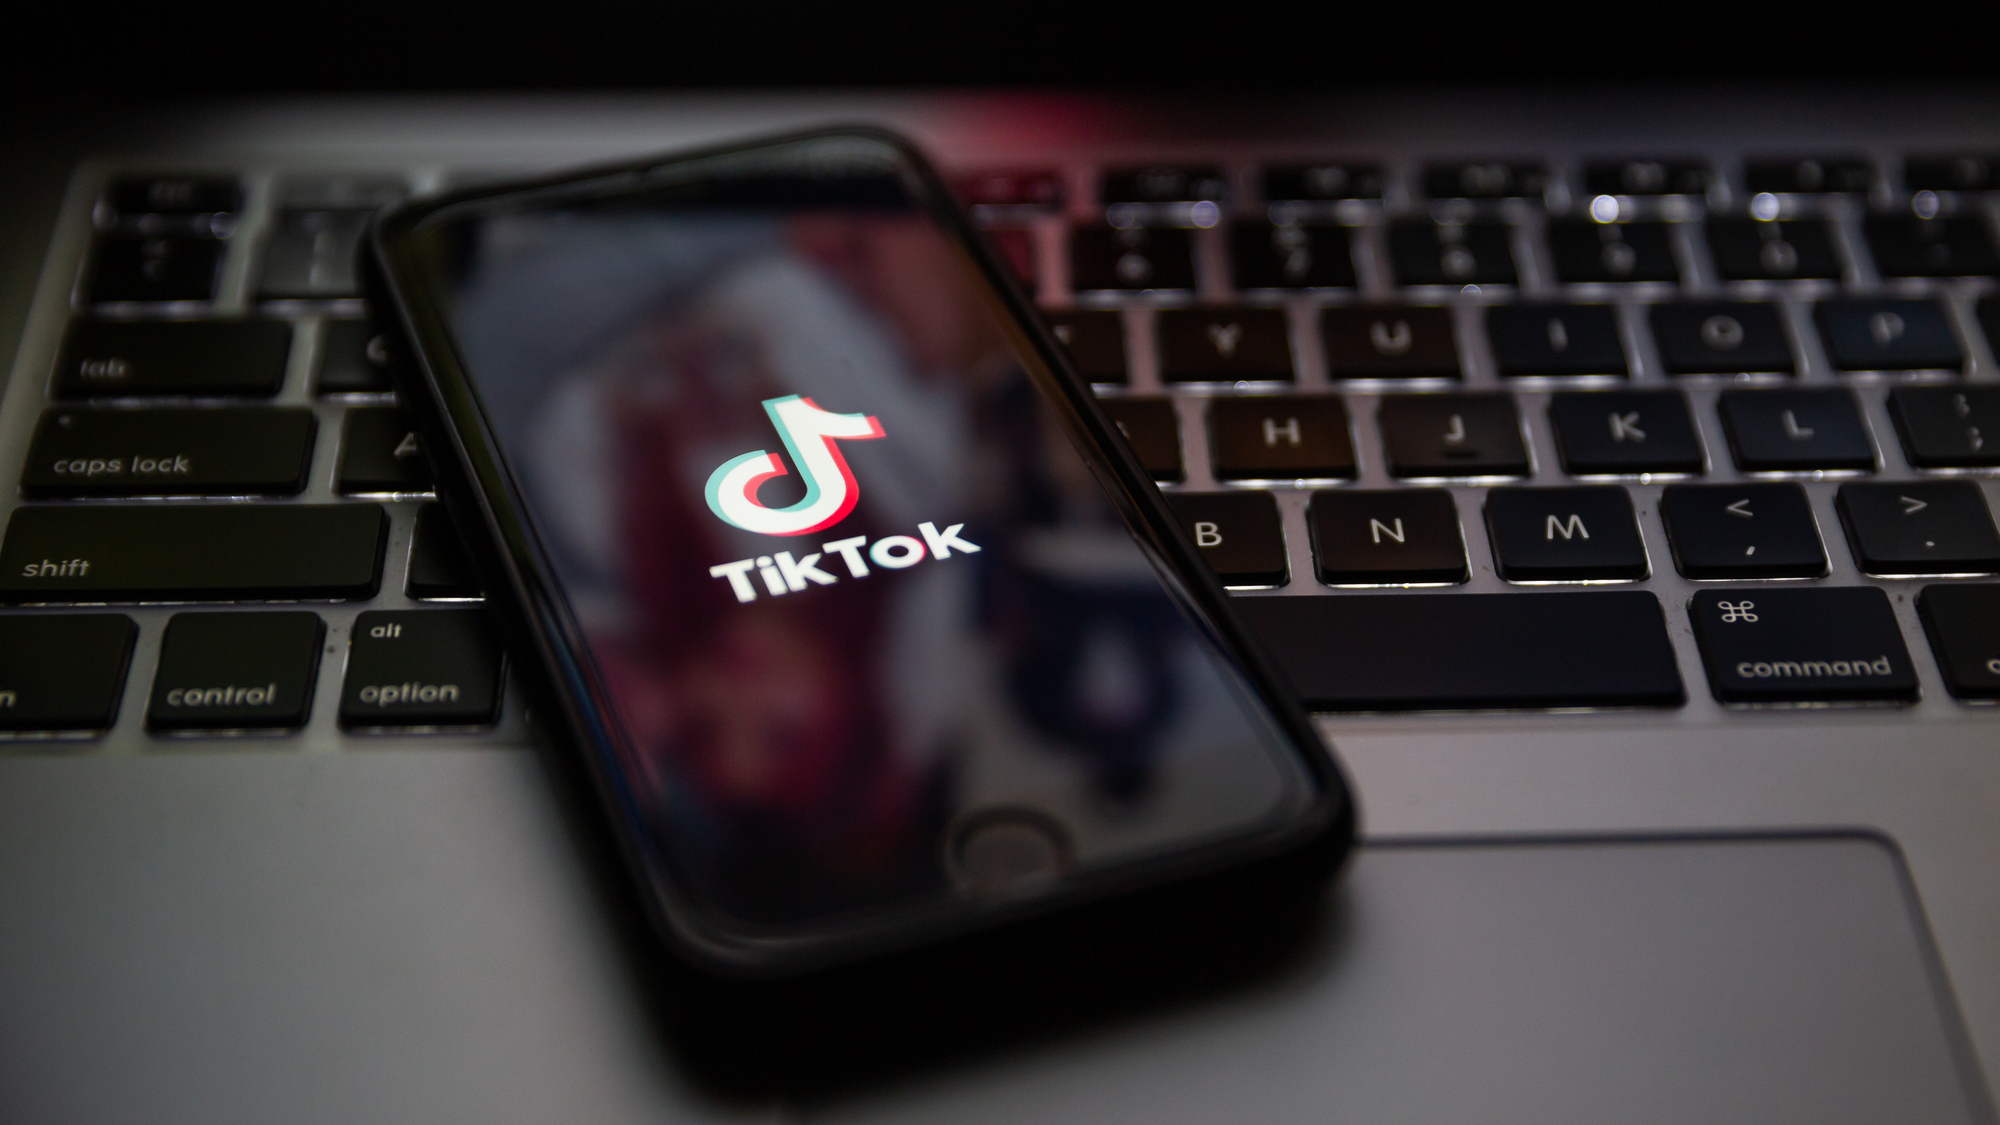 Montana is the first state to ‘ban’ TikTok, but it’s complicated